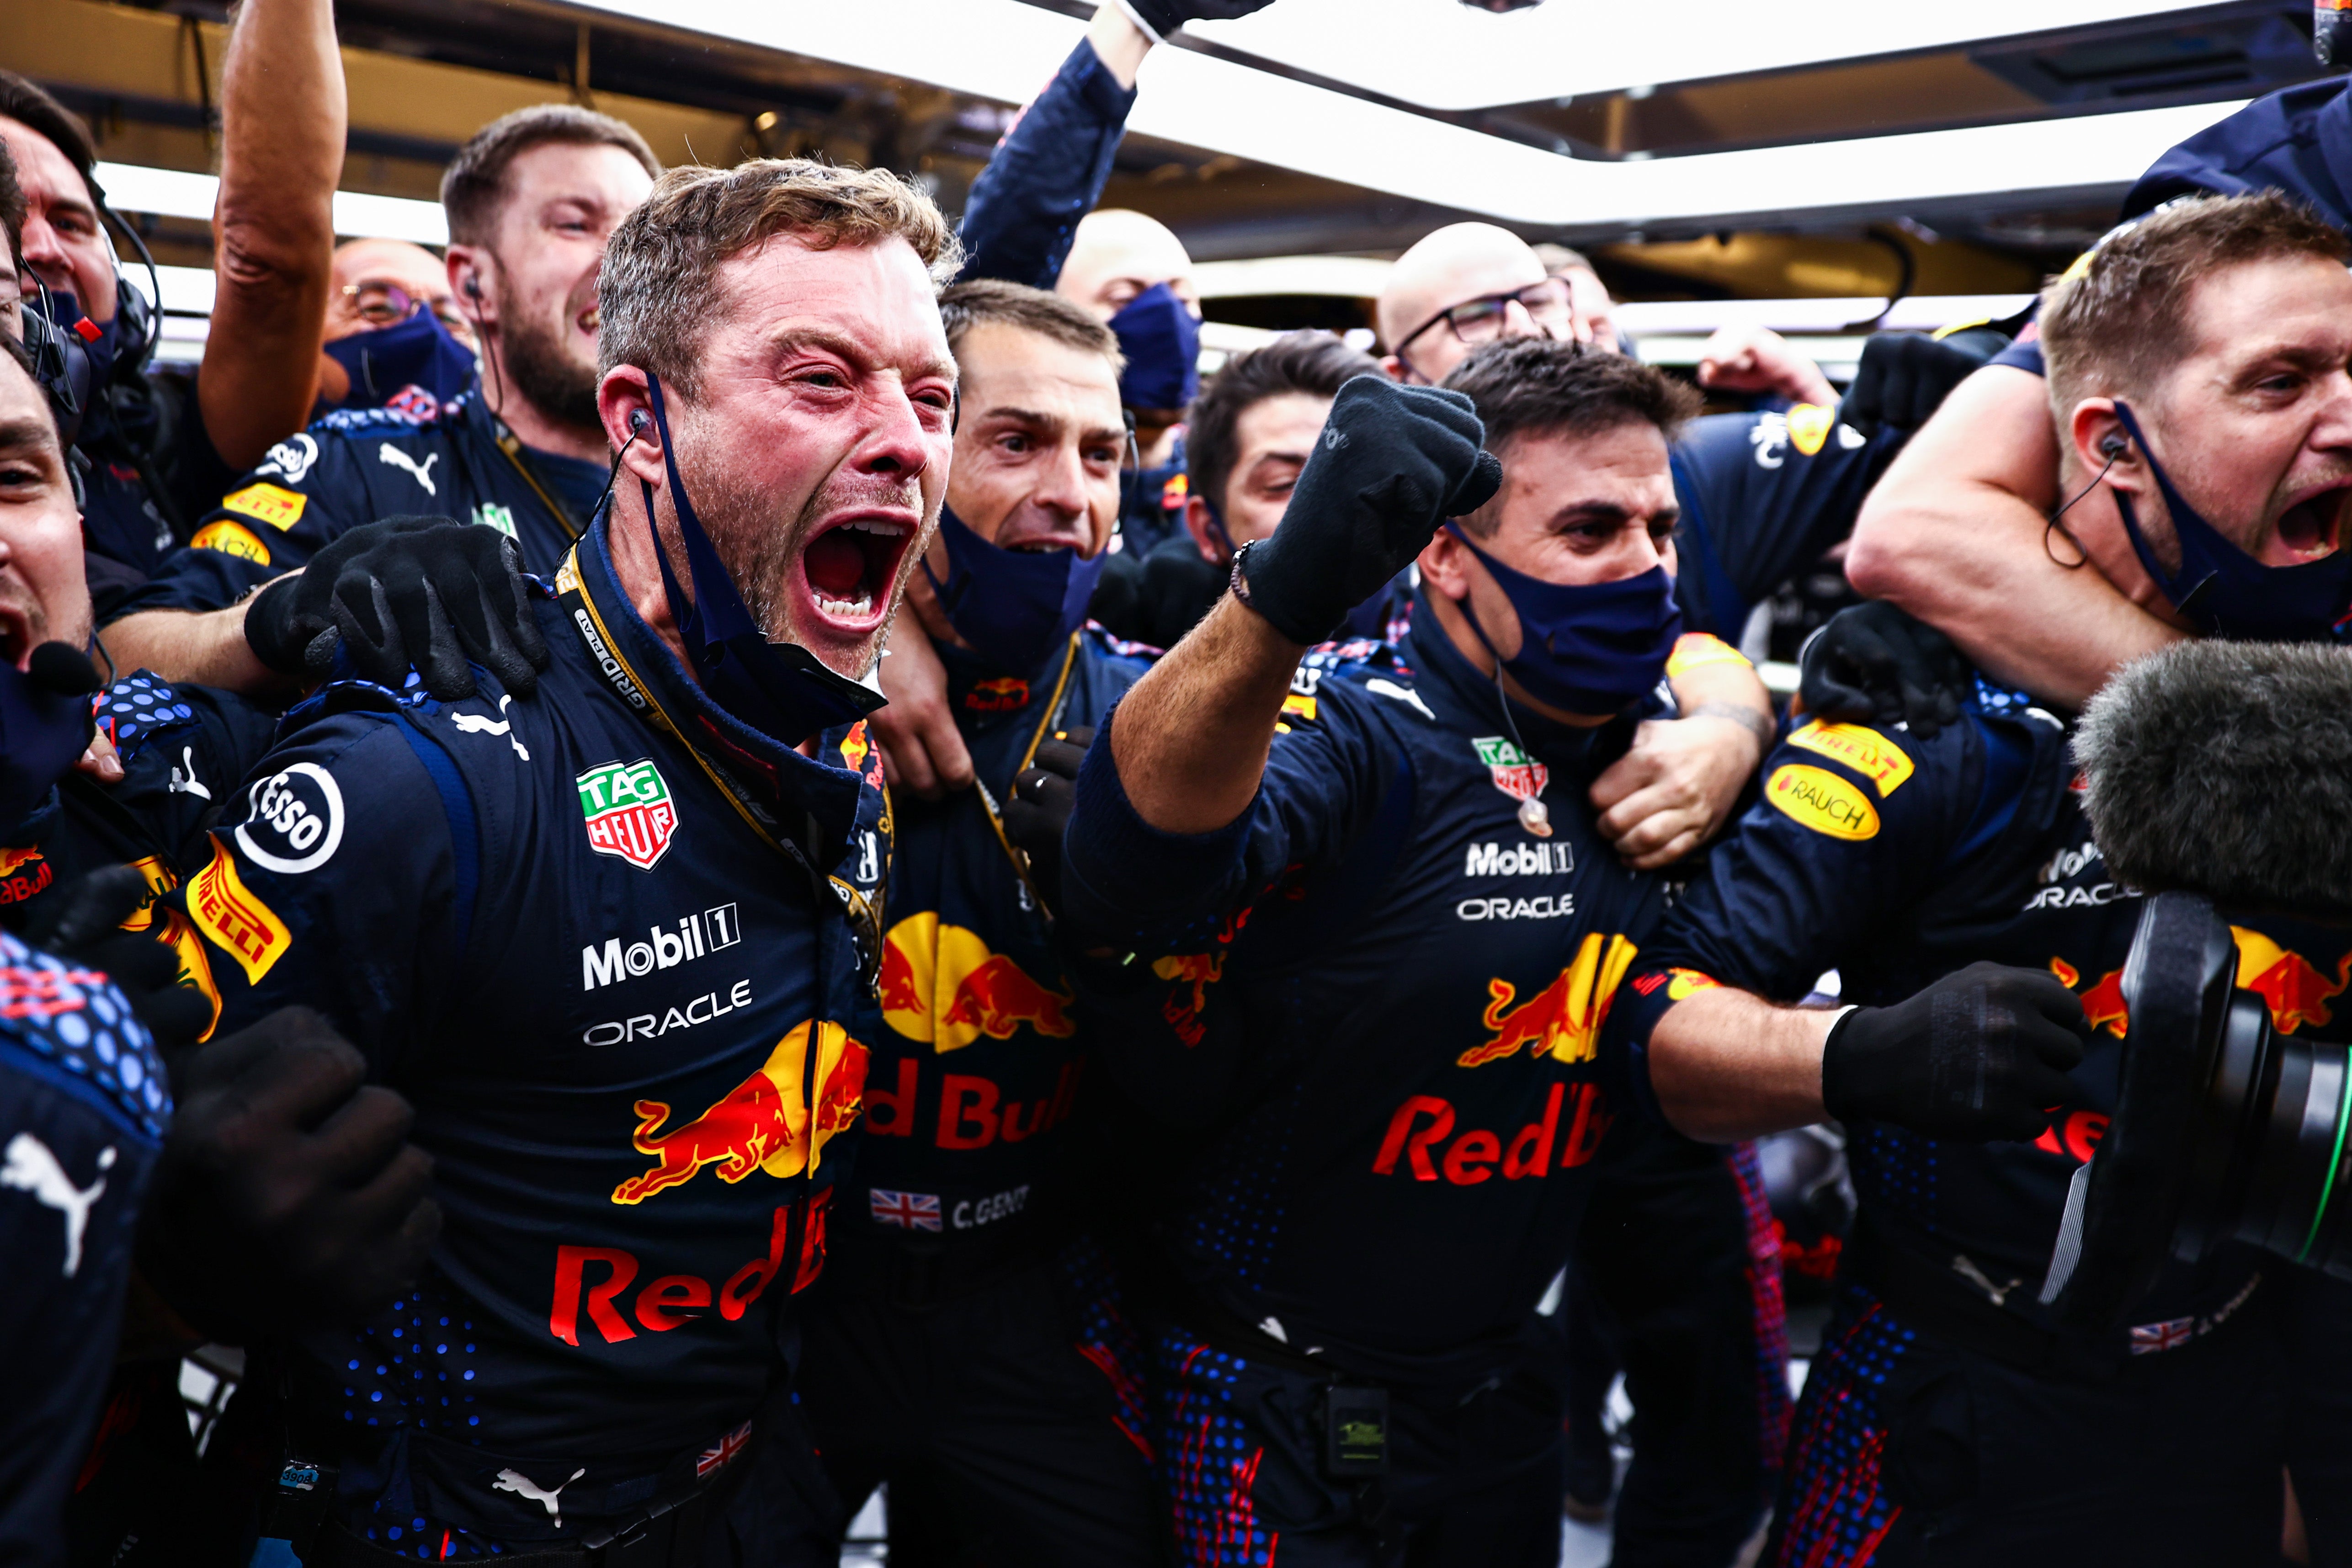 ...and celebrate as Verstappen takes the lead on the final lap